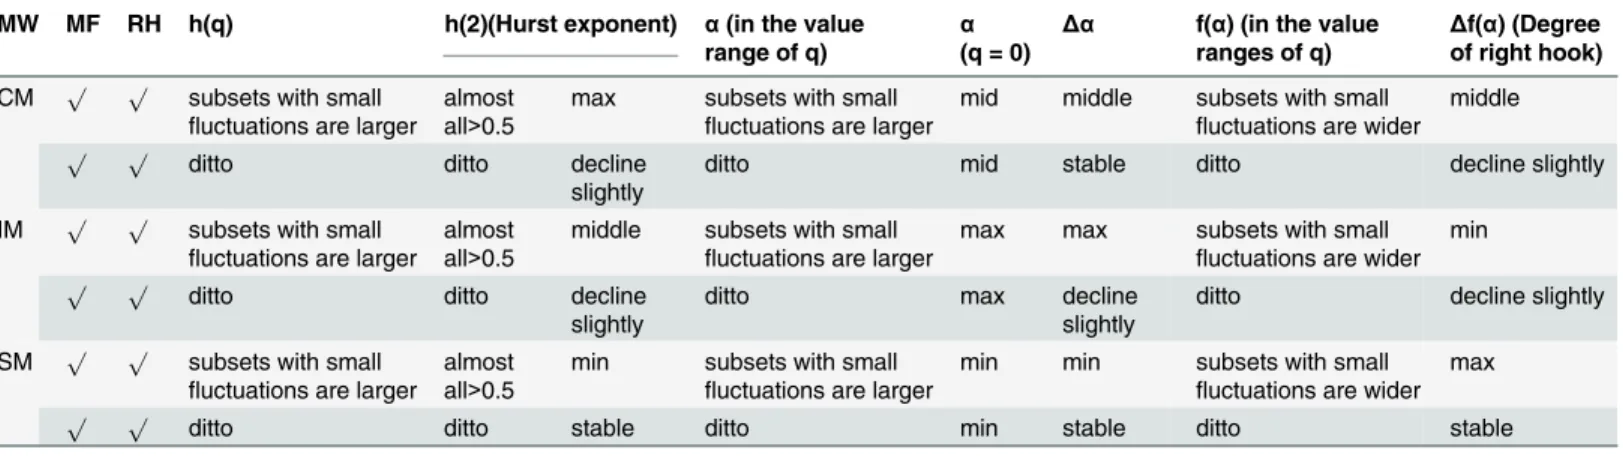 Table 3. Summary of the similarities and differences of fractal features in different mappings.